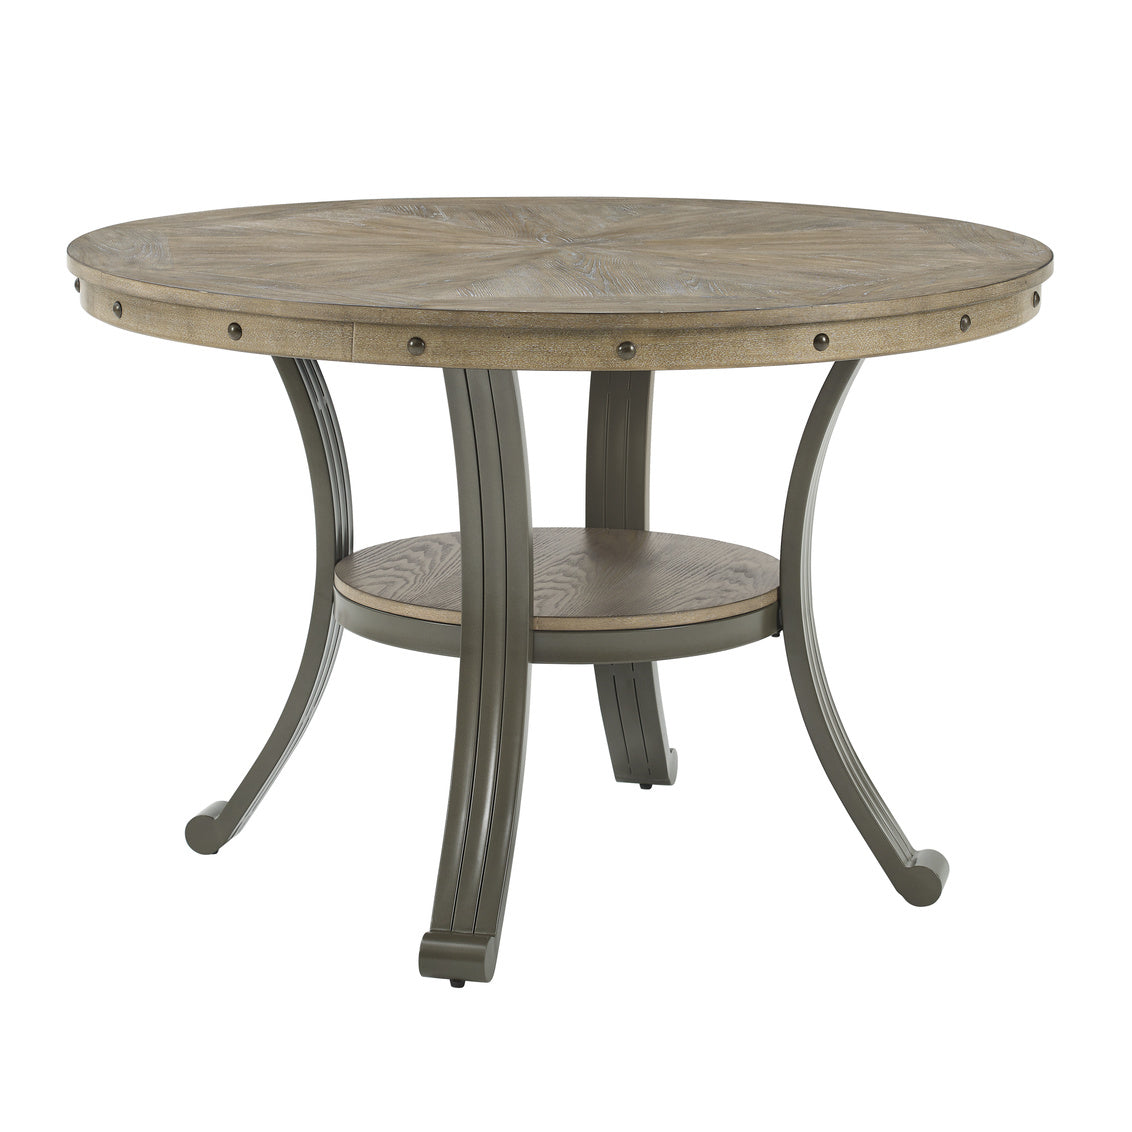 WEEKLY or MONTHLY. Frankie Pewter Dining Table & 4 Side Chairs